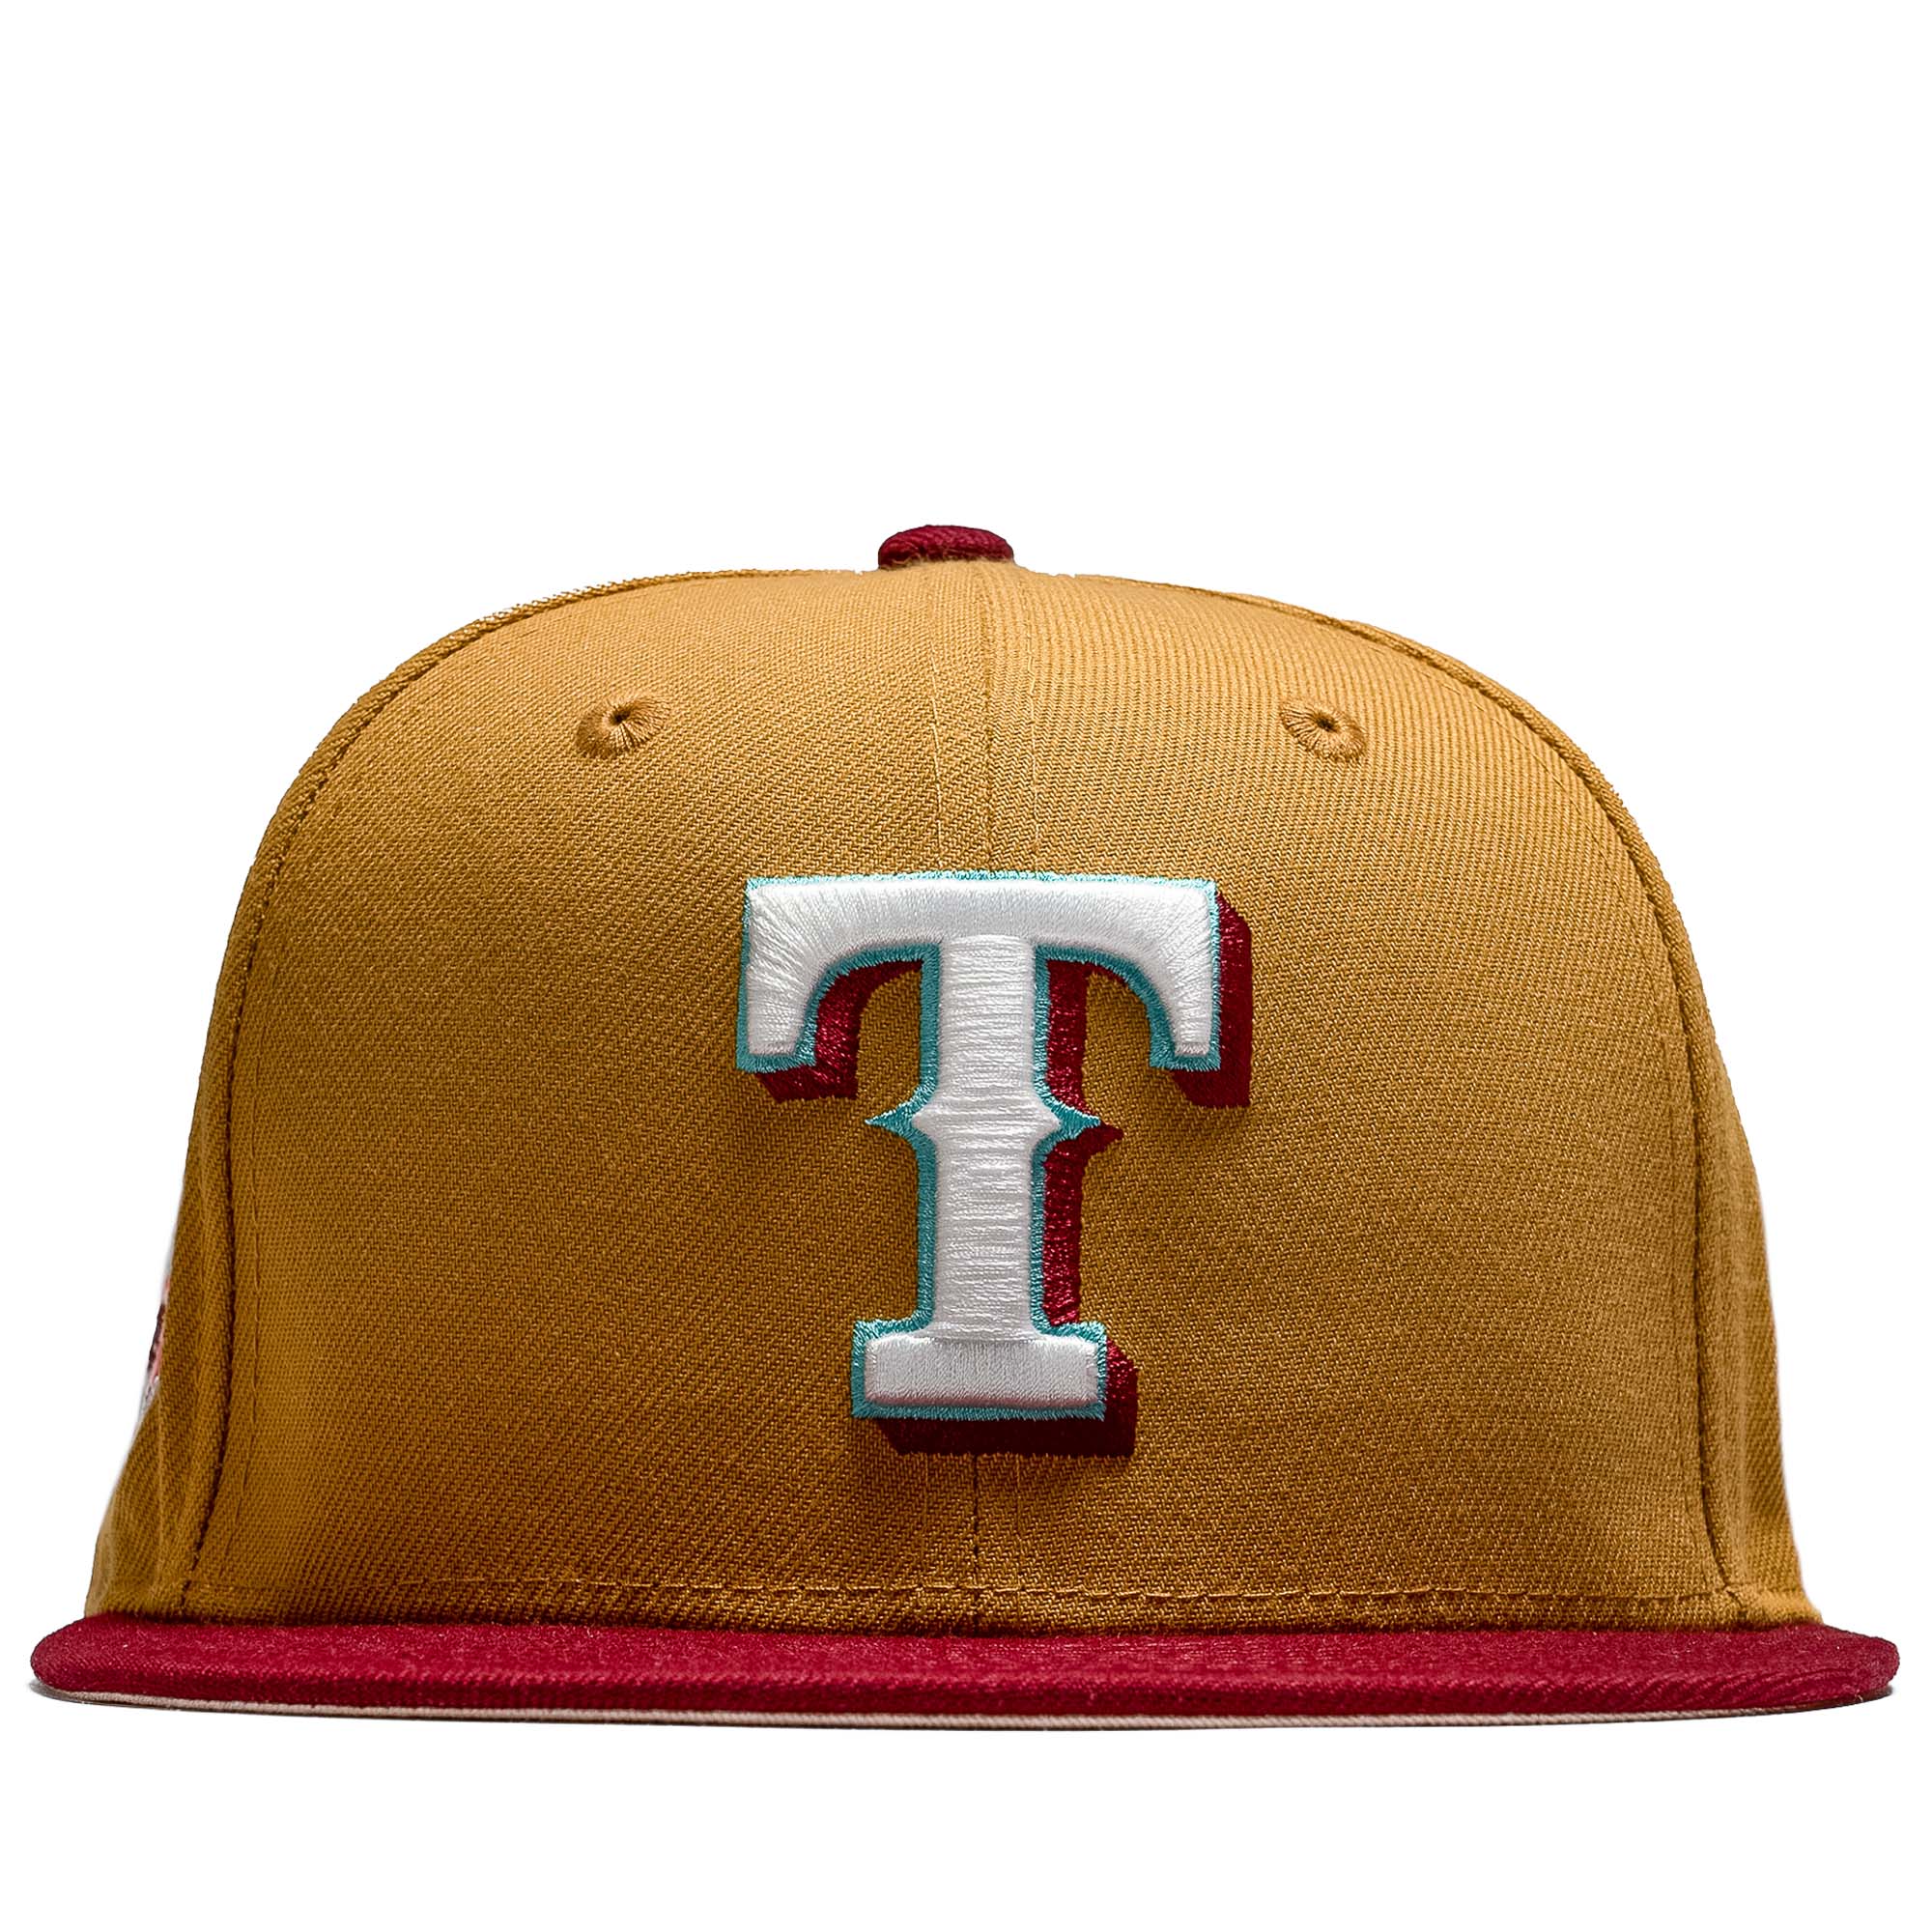 New Era x Politics Texas Rangers 59FIFTY Fitted Hat - Tan/Red, Size 7 1/2 by Sneaker Politics